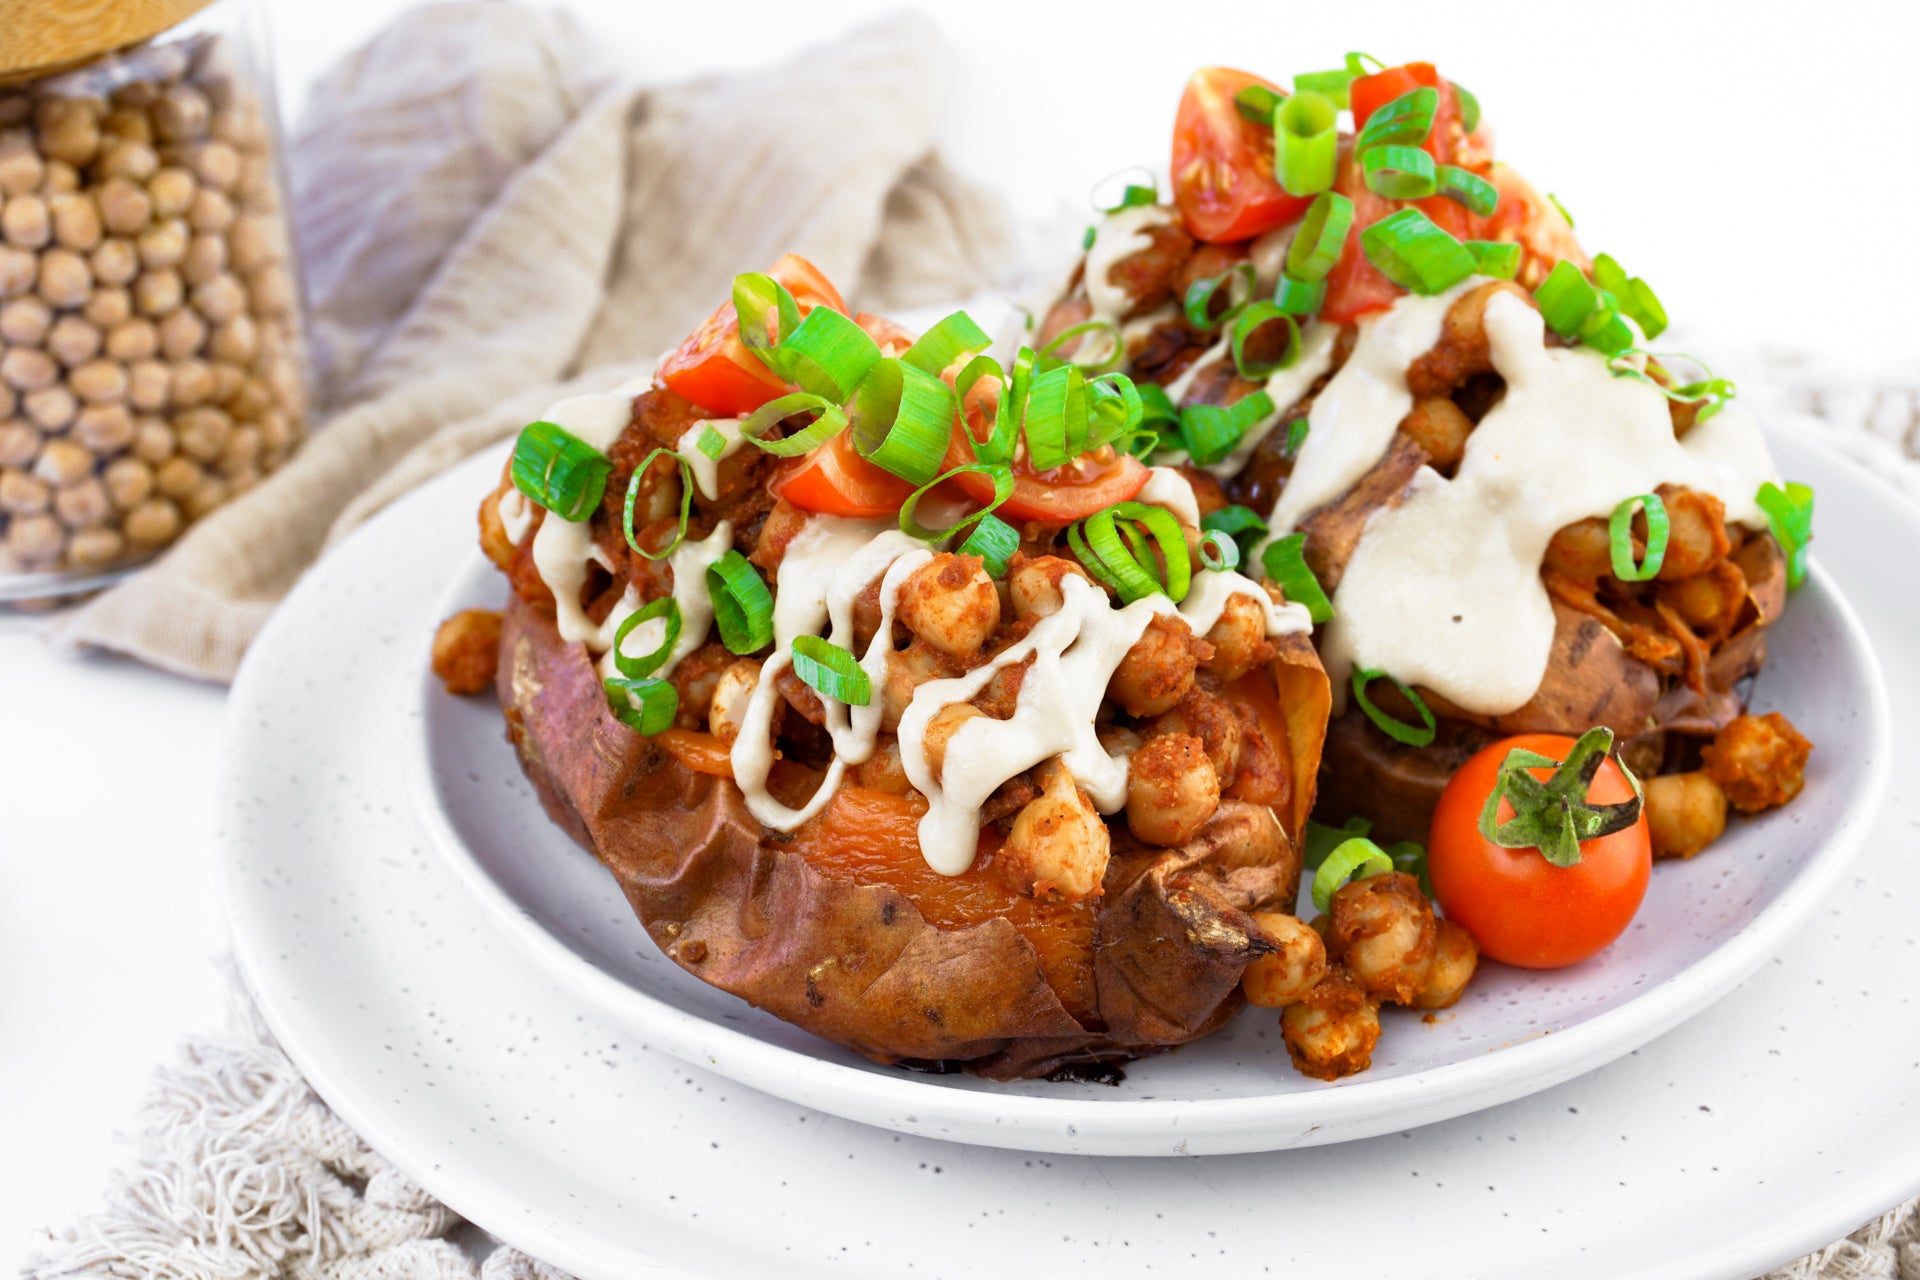 Stuffed Sweet Potatoes with Mexican Spiced Chickpeas